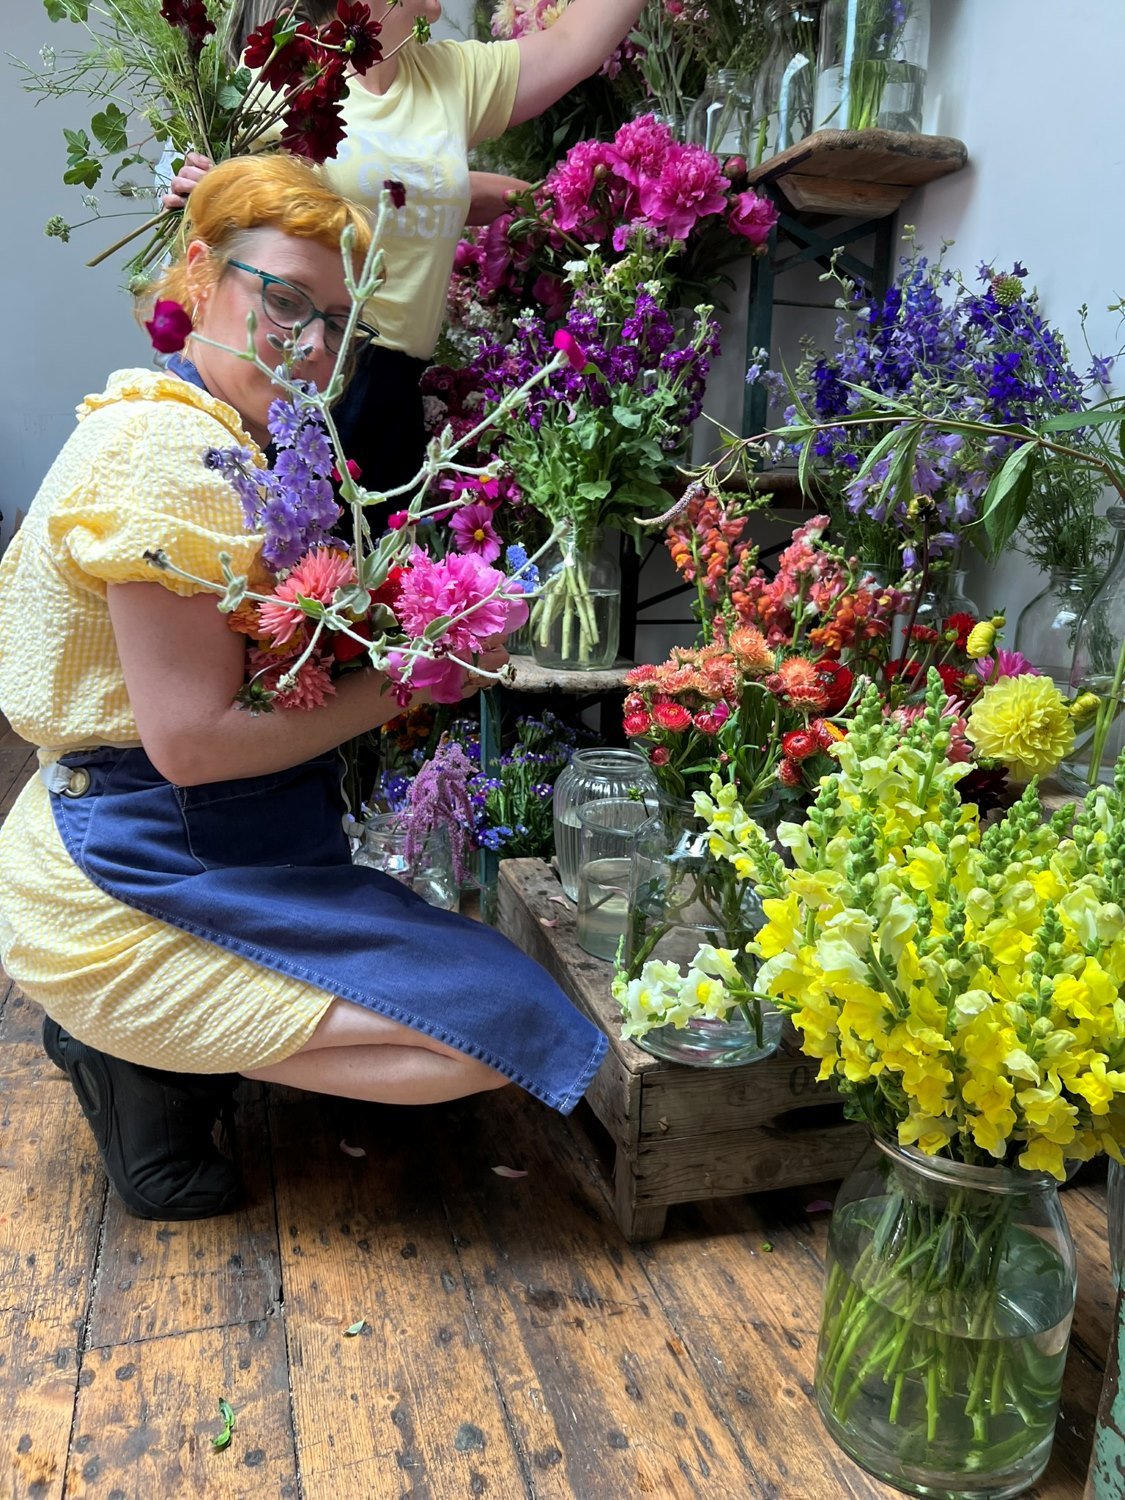 Student selecting British flowers at the school room